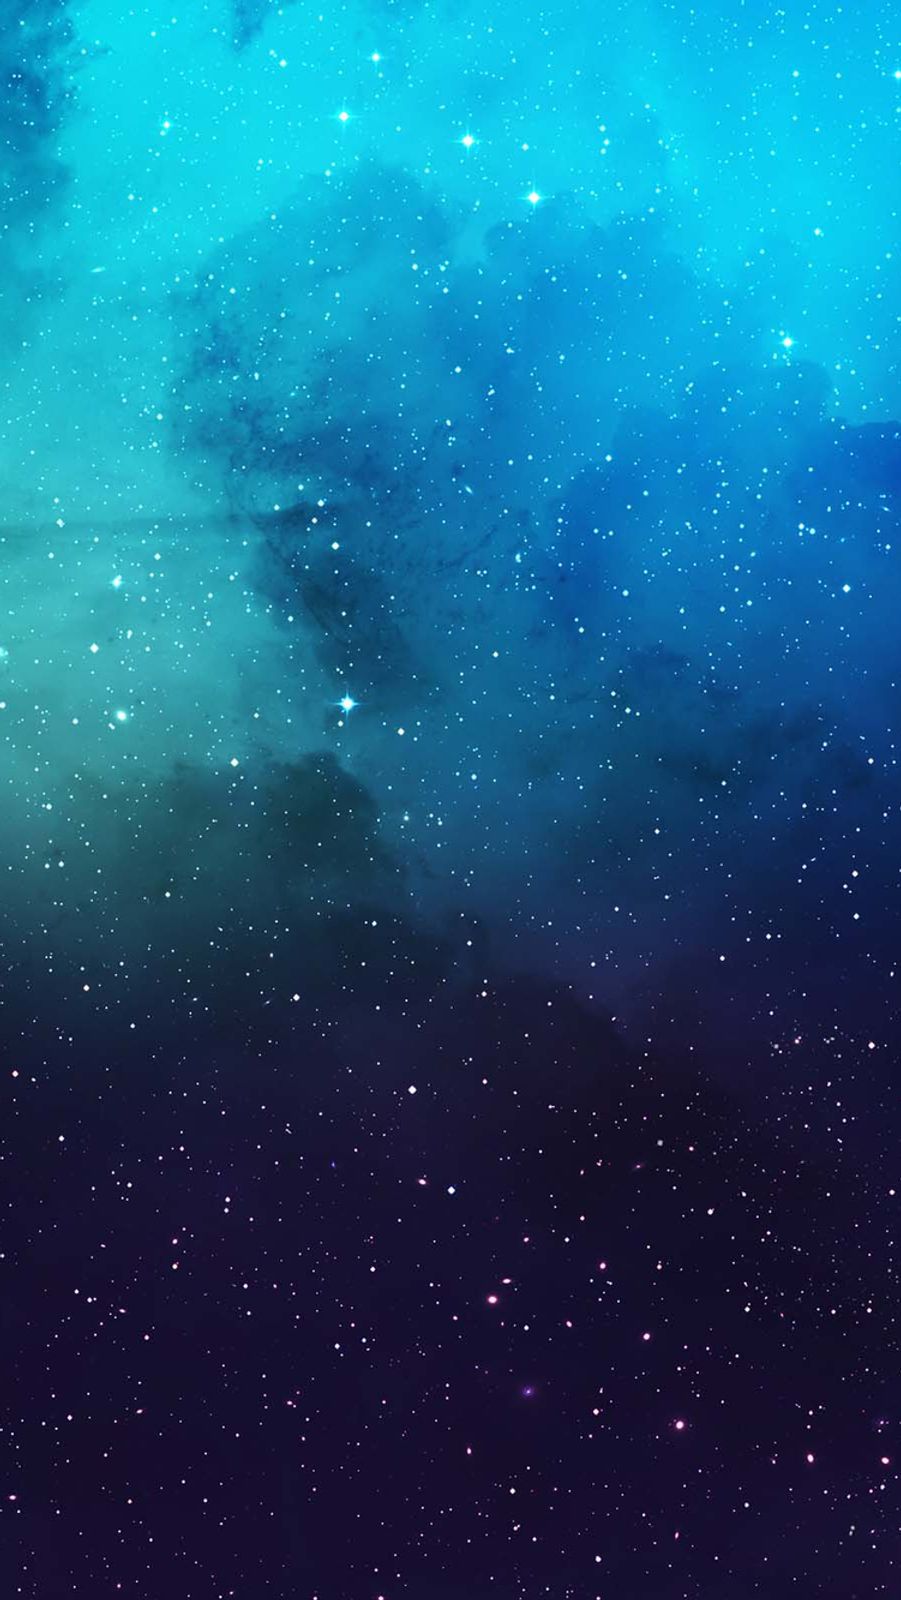 IPhone wallpaper of the day: a starry night sky - Cyan